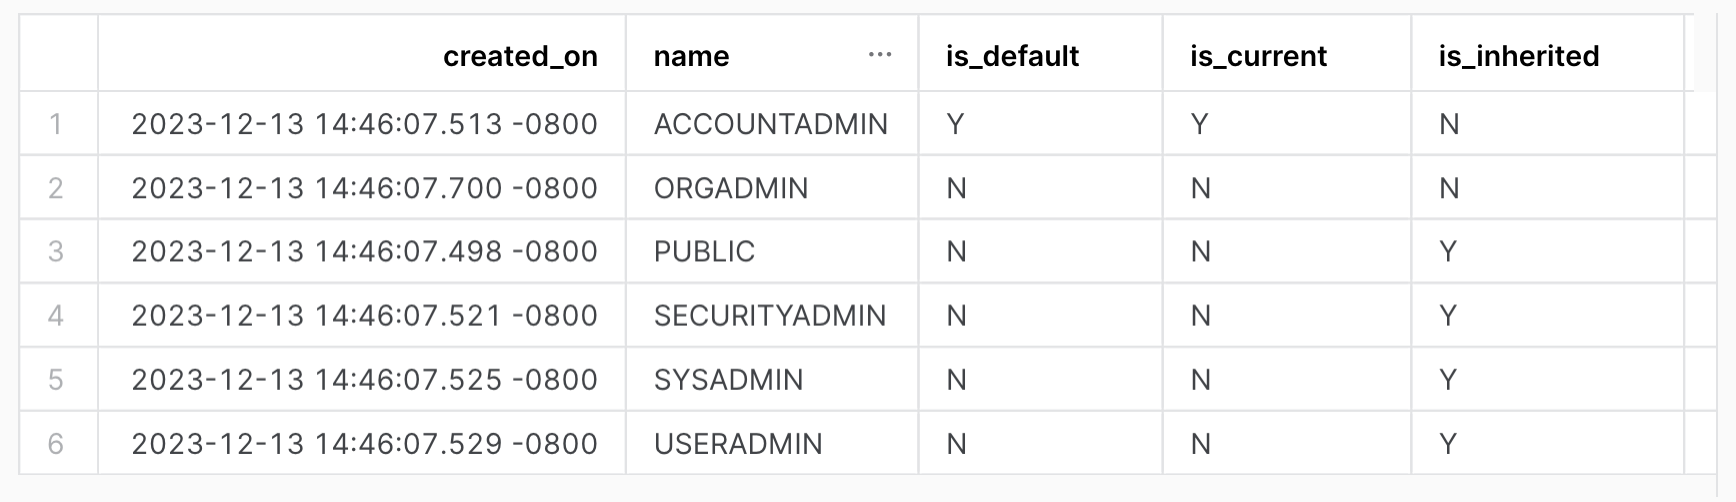 Show all the roles in the account. Table output with the following columns: created_on, name, is_default, is_current, is_inherited.